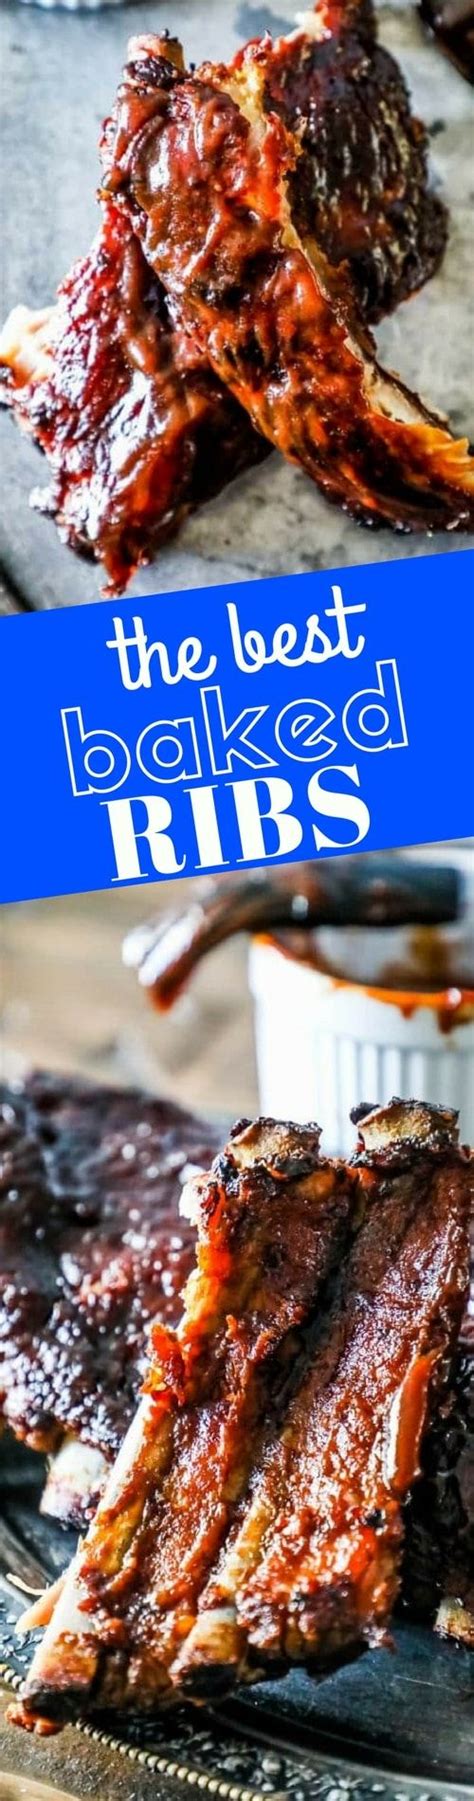 the best bbq ribs recipe ever